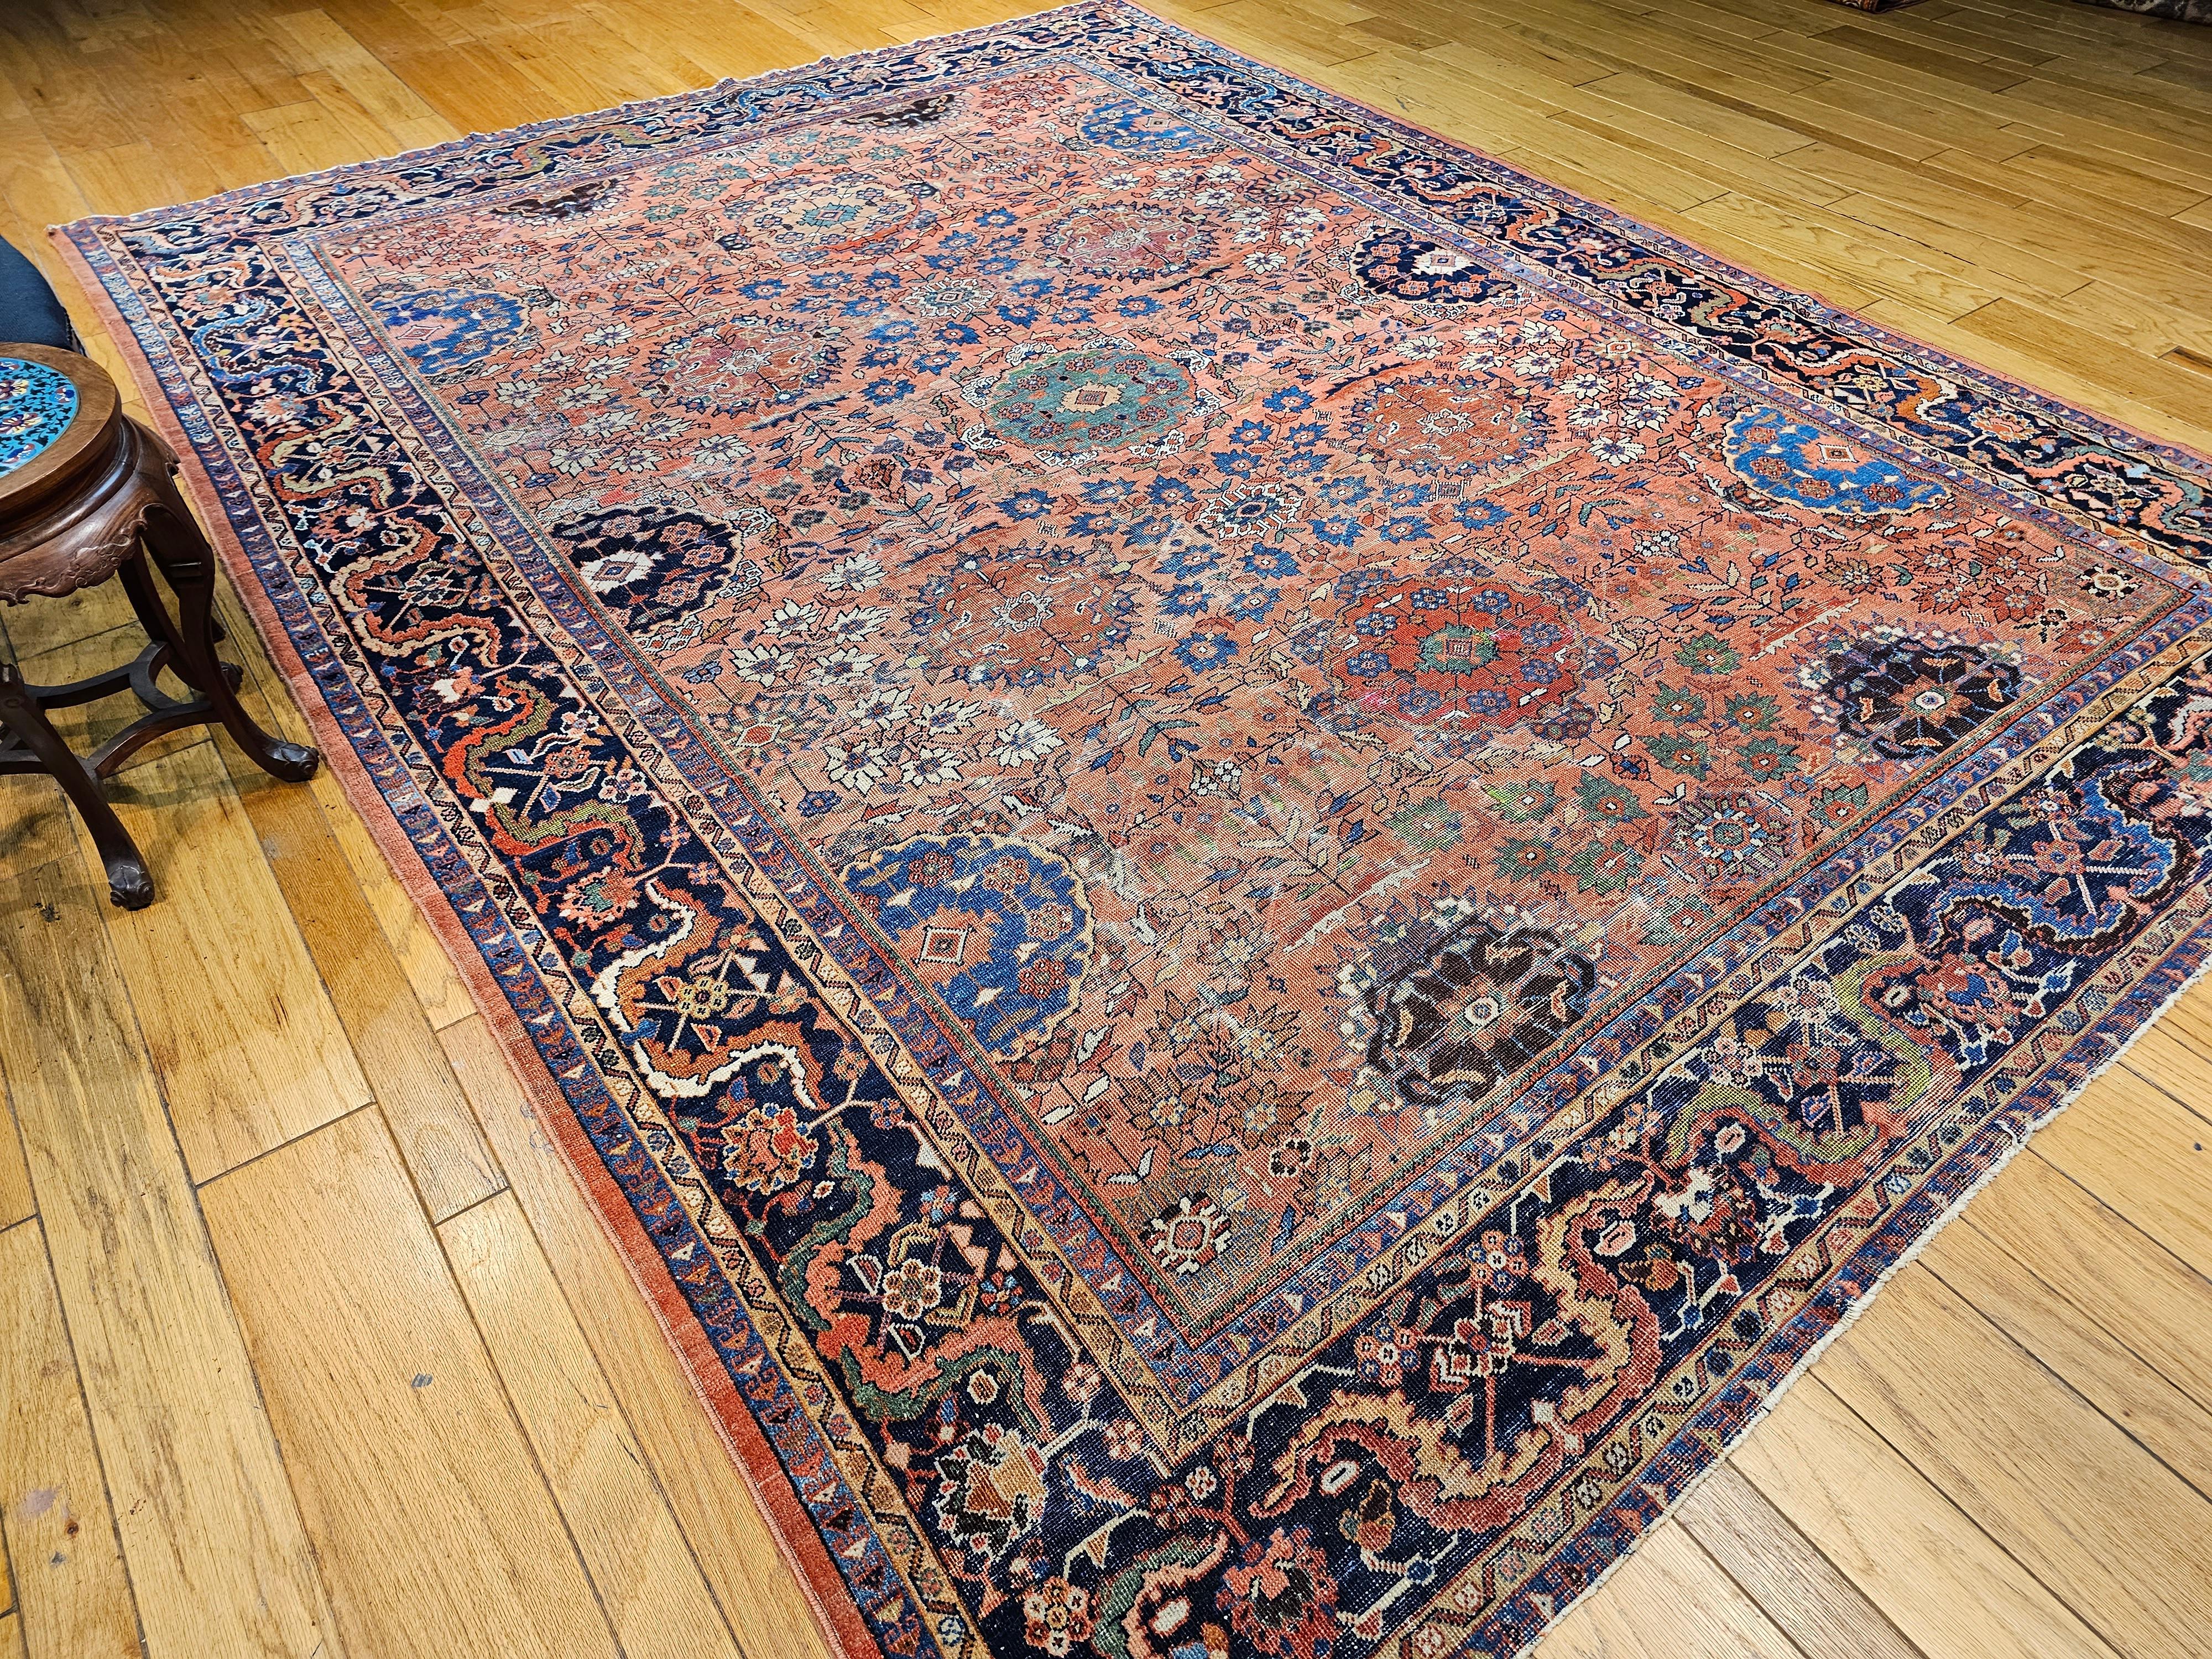 Vintage Persian Mahal Sultanabad Room Size Rug in Brick Red, Navy Blue 8